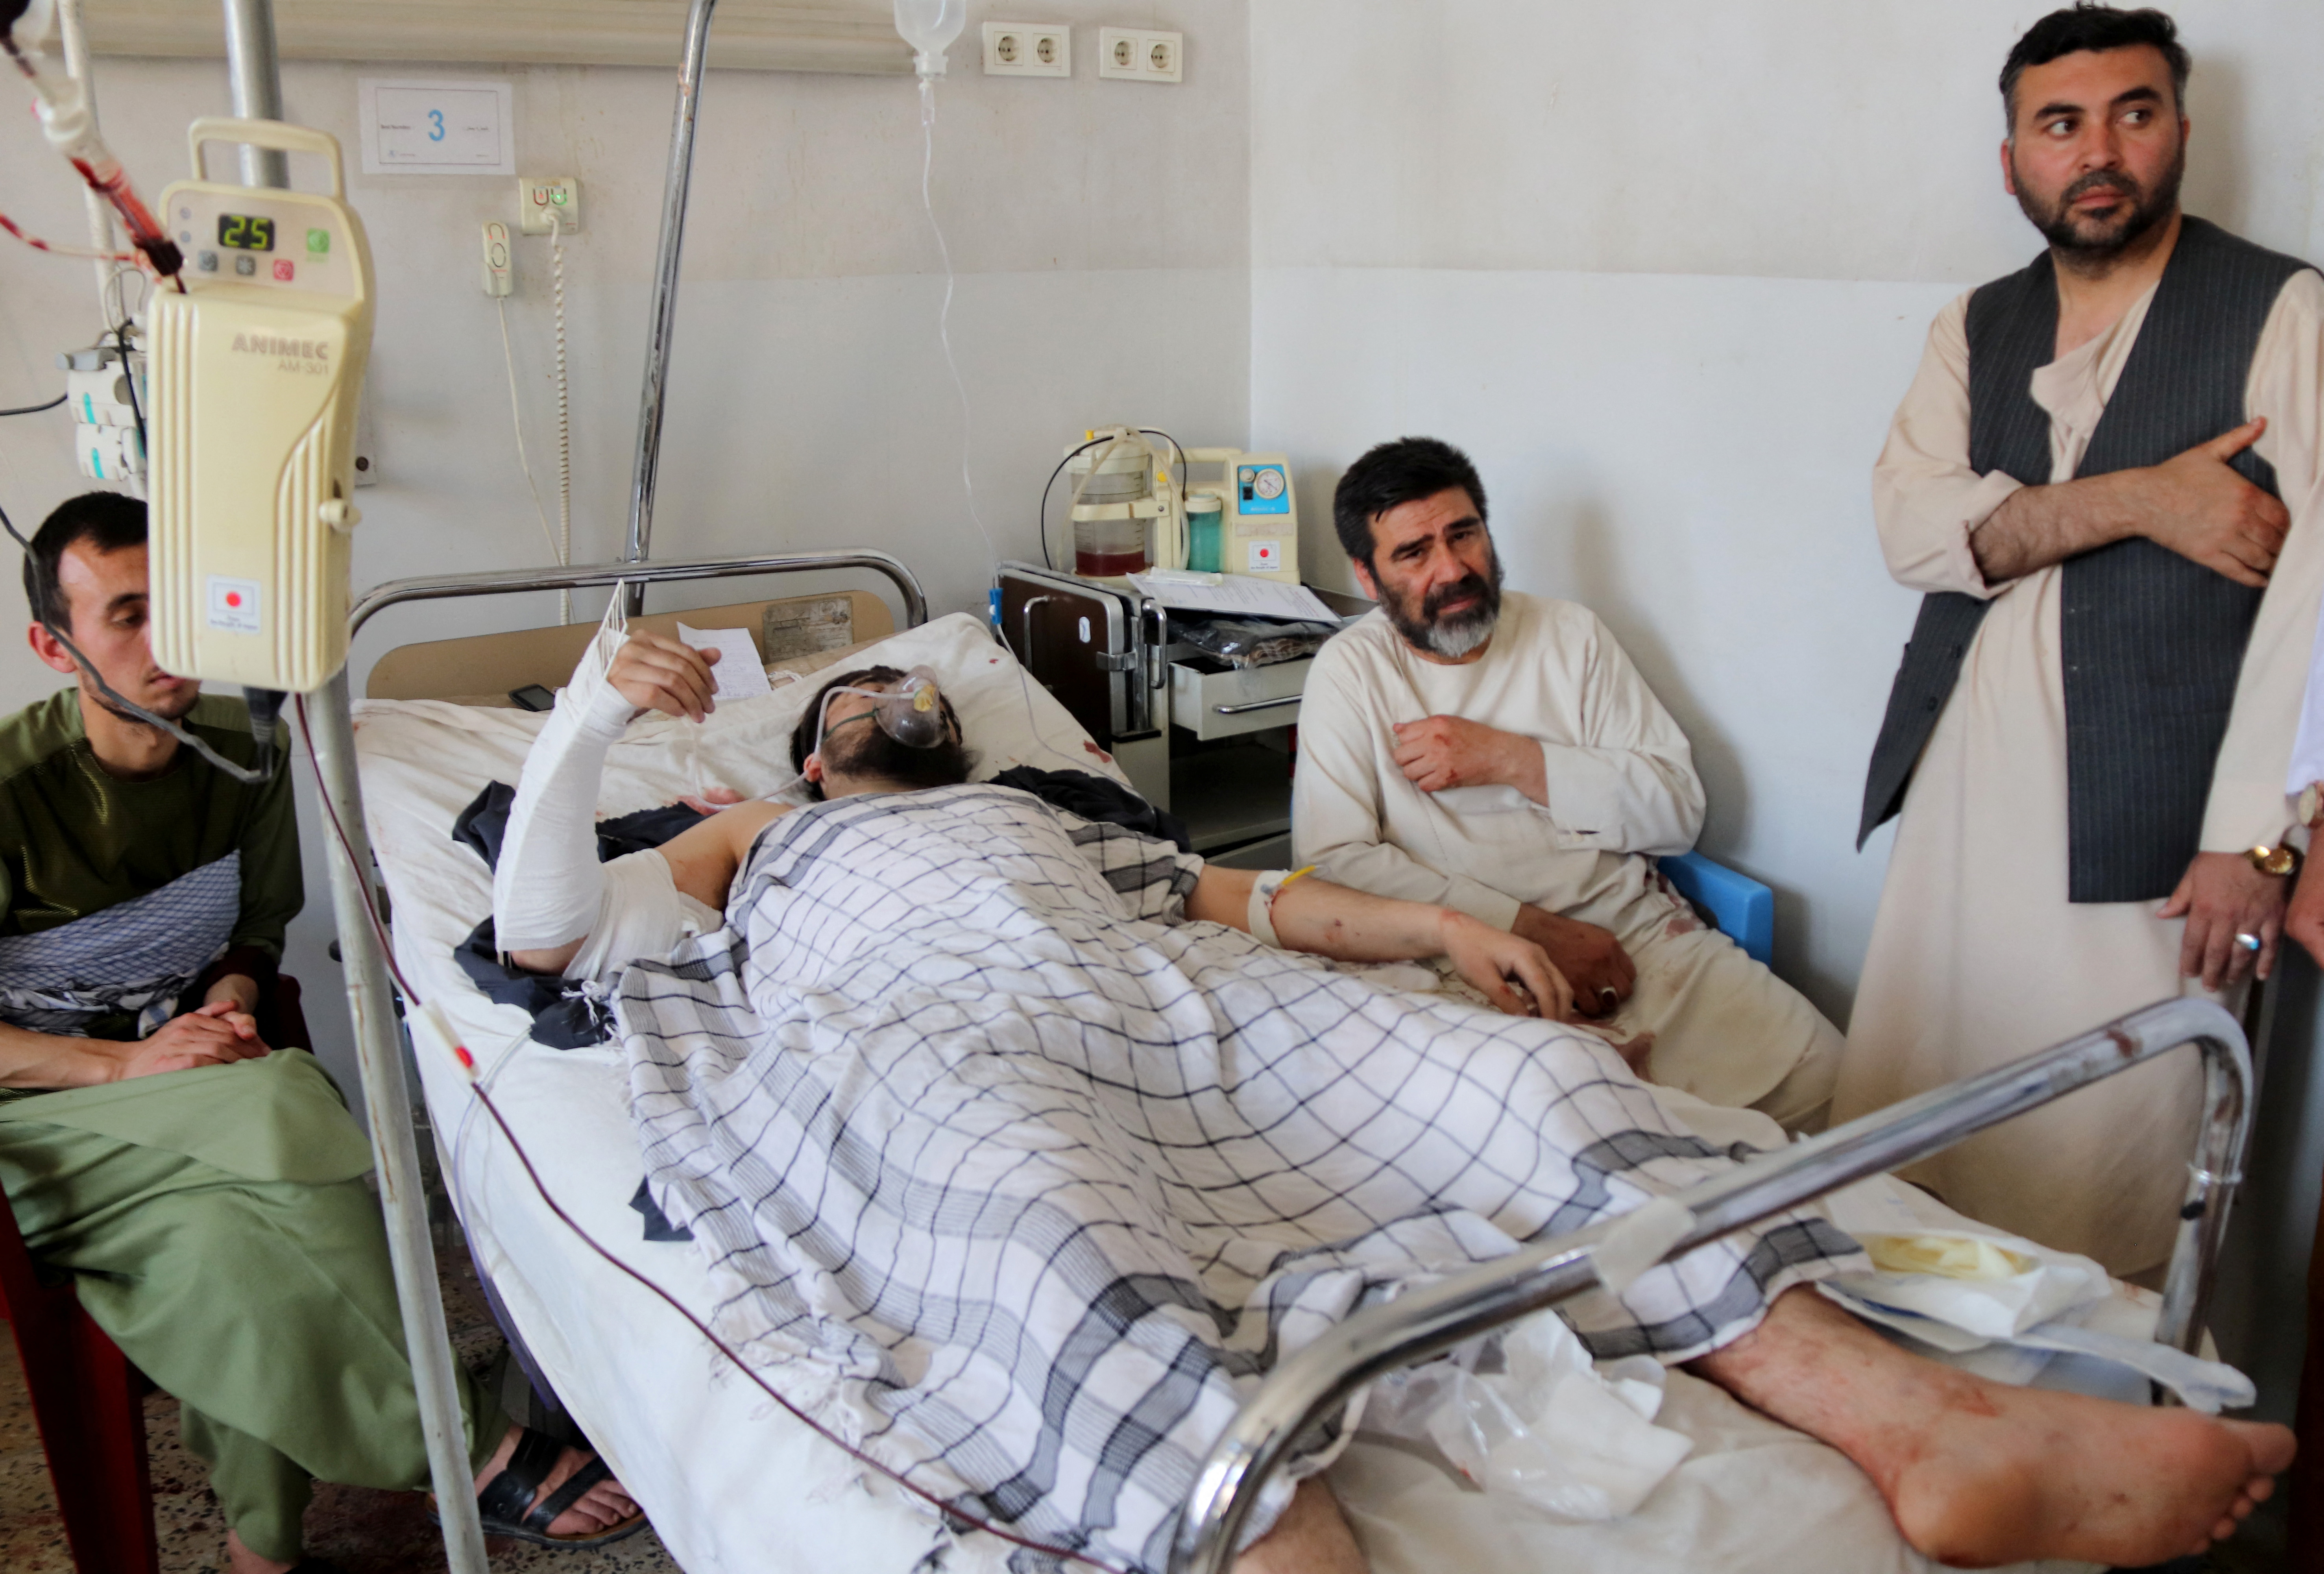 An Afghan man receives treatment in a hospital after he was injured in an explosion at a Shi'ite mosque in Mazar-e-Sharif